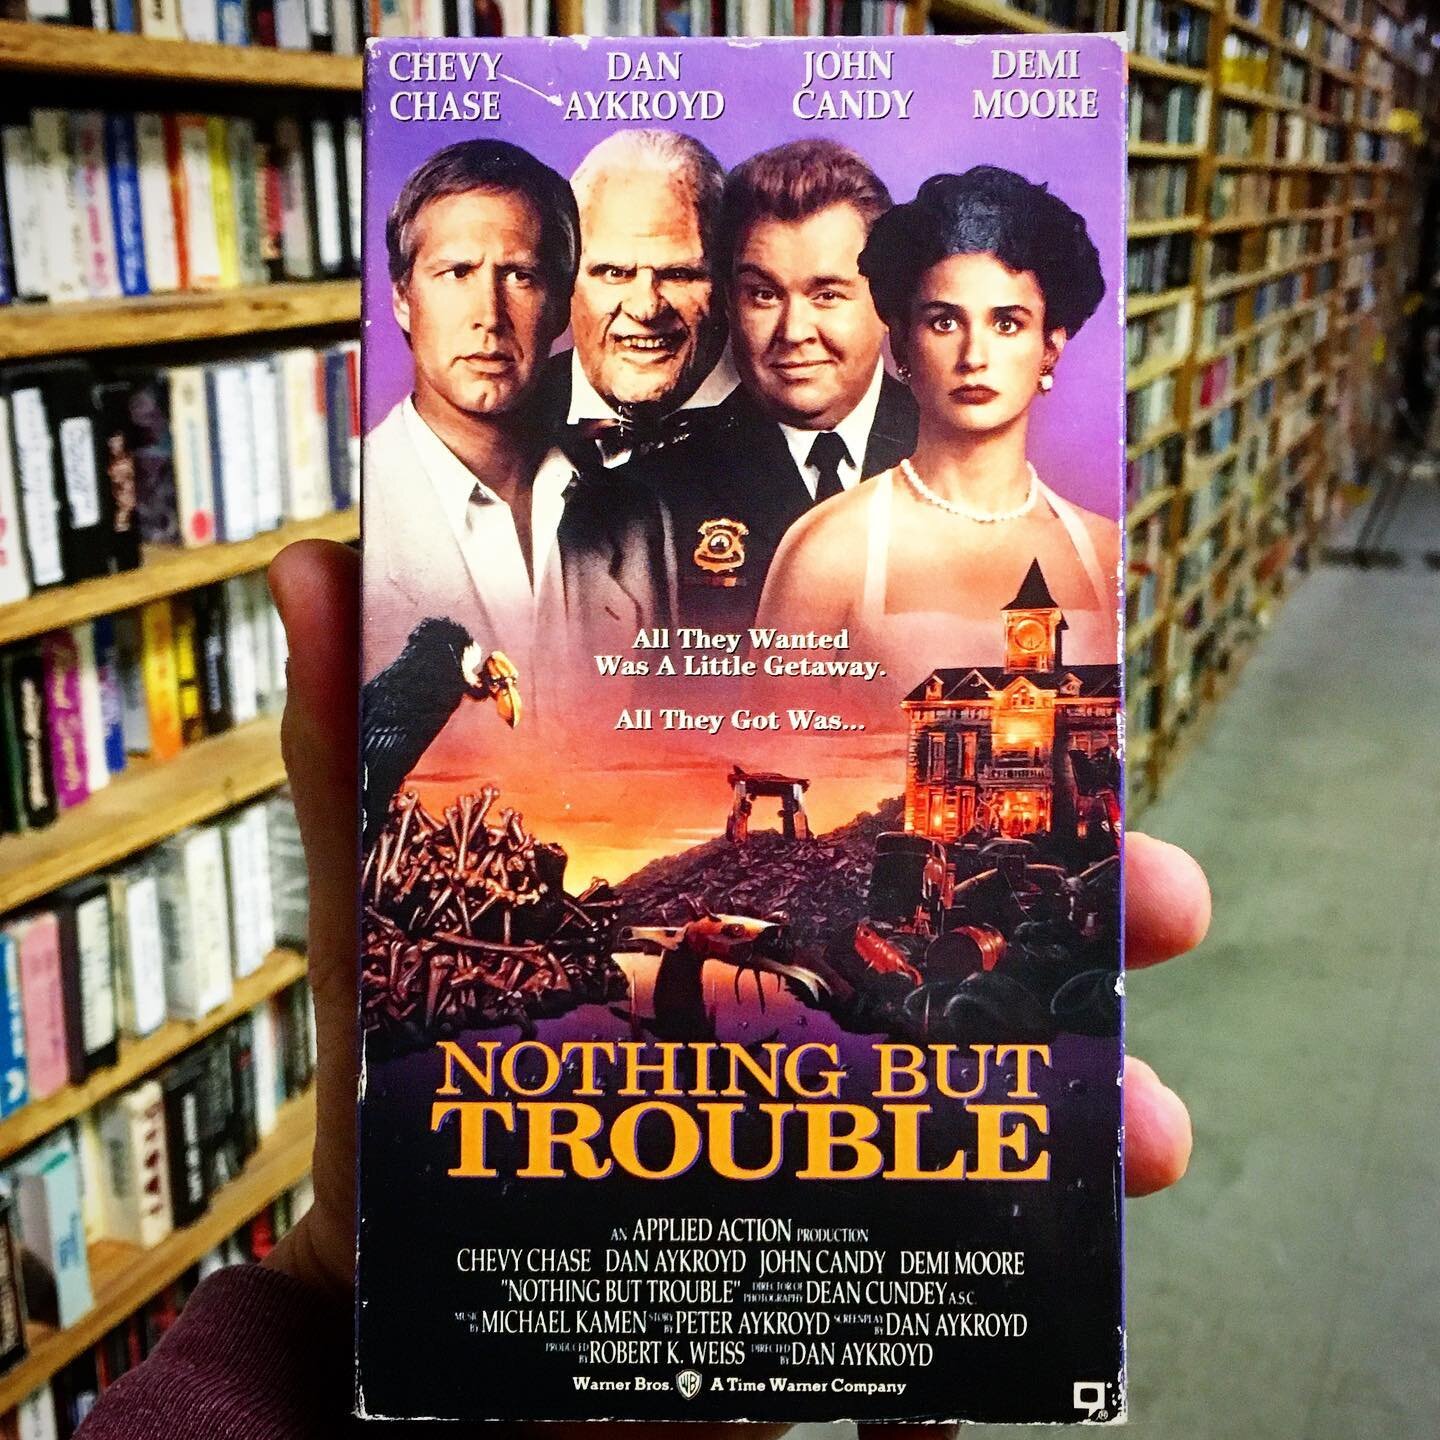 Nothing But Trouble (1991) 📼 #Comedy #JohnCandy #DemiMoore #DanAykroyd #ChevyChase #90s #VHS